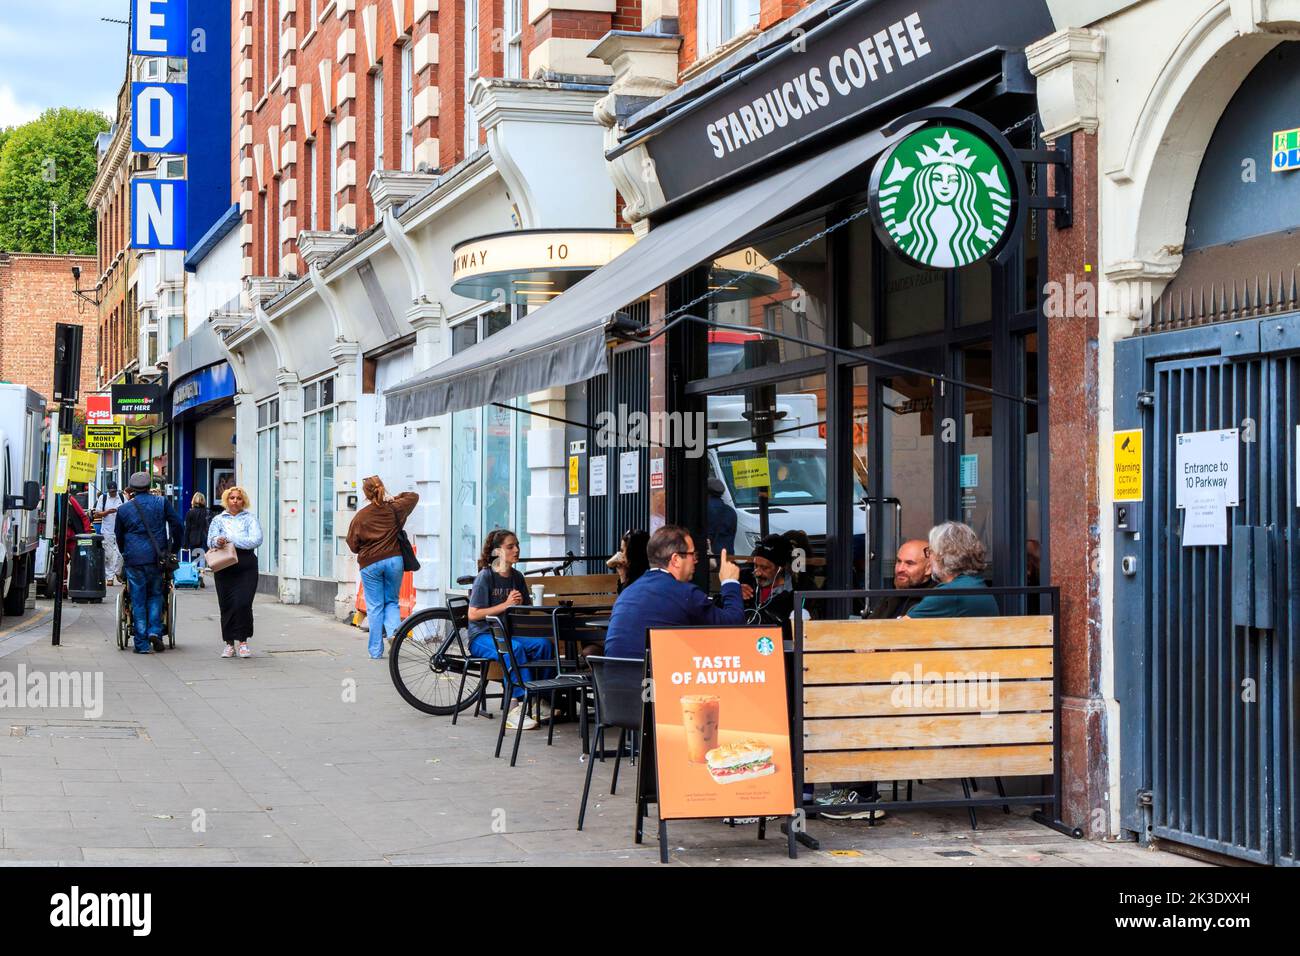 People seated outside Starbucks Coffee shop in Parkway, Camden Town, London, UK Stock Photo